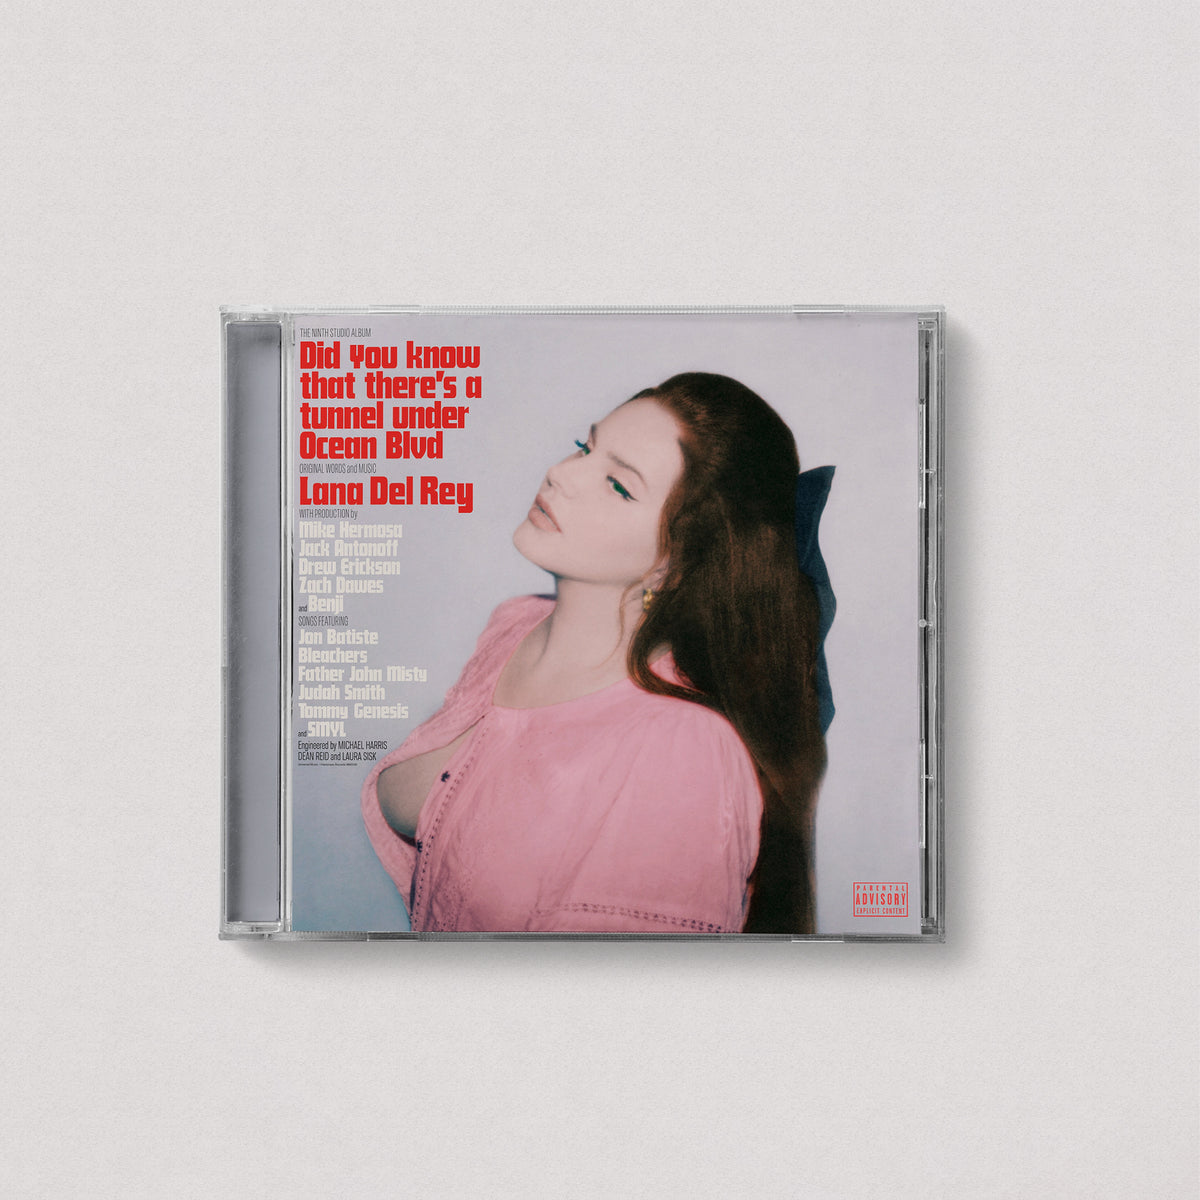 Lana Del Rey - Did You Know That There’s a Tunnel Under Ocean Blvd (Alternative Cover #3, CD)